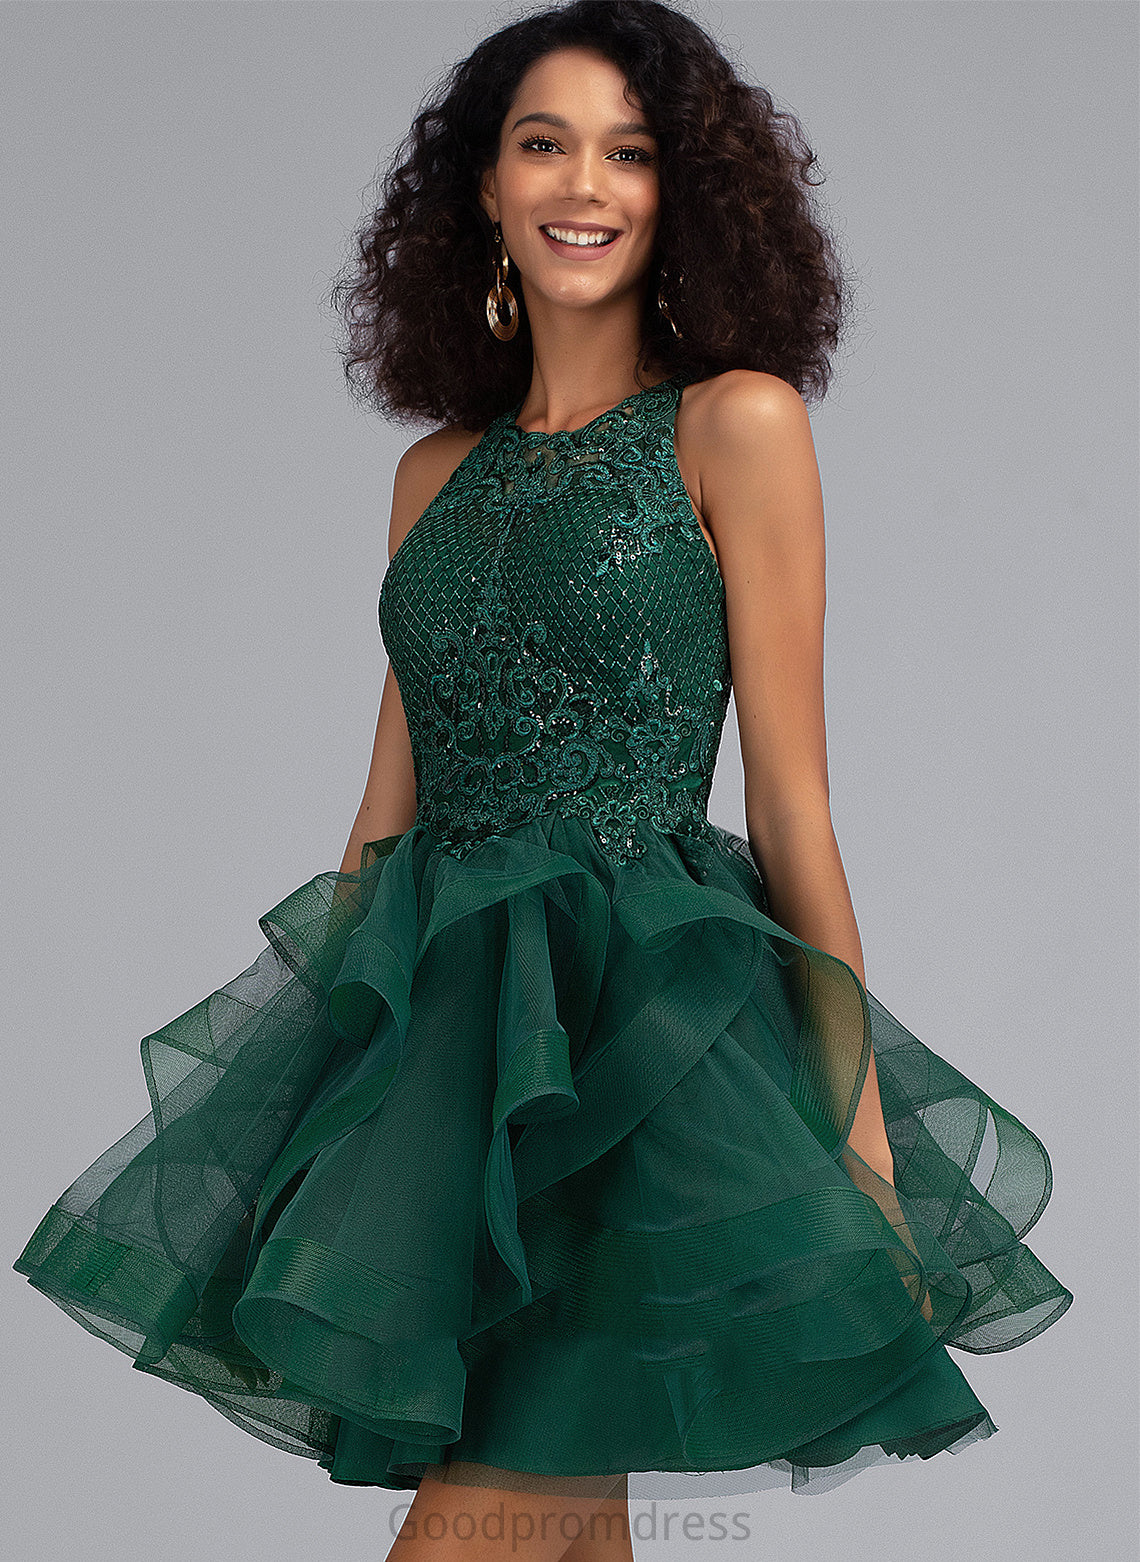 Scoop With Short/Mini Ball-Gown/Princess Sequins Tulle Amira Neck Dress Homecoming Dresses Homecoming Lace